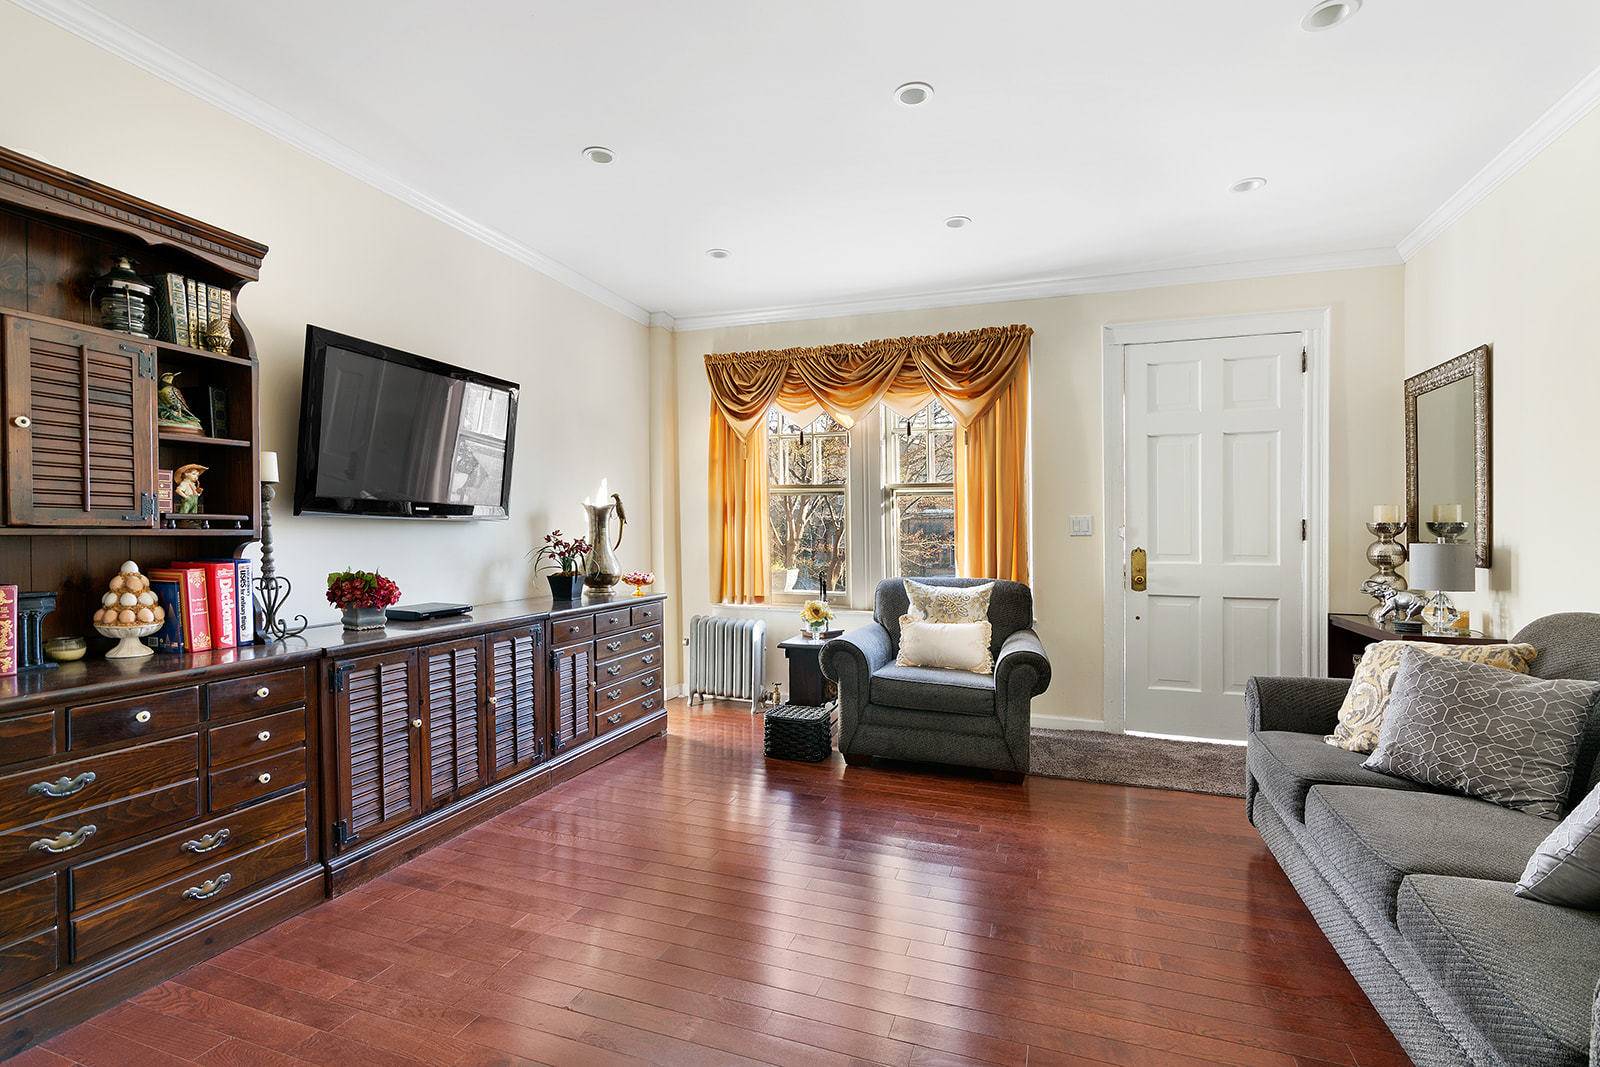 For the first time in 60 years this single family townhouse has come to market.